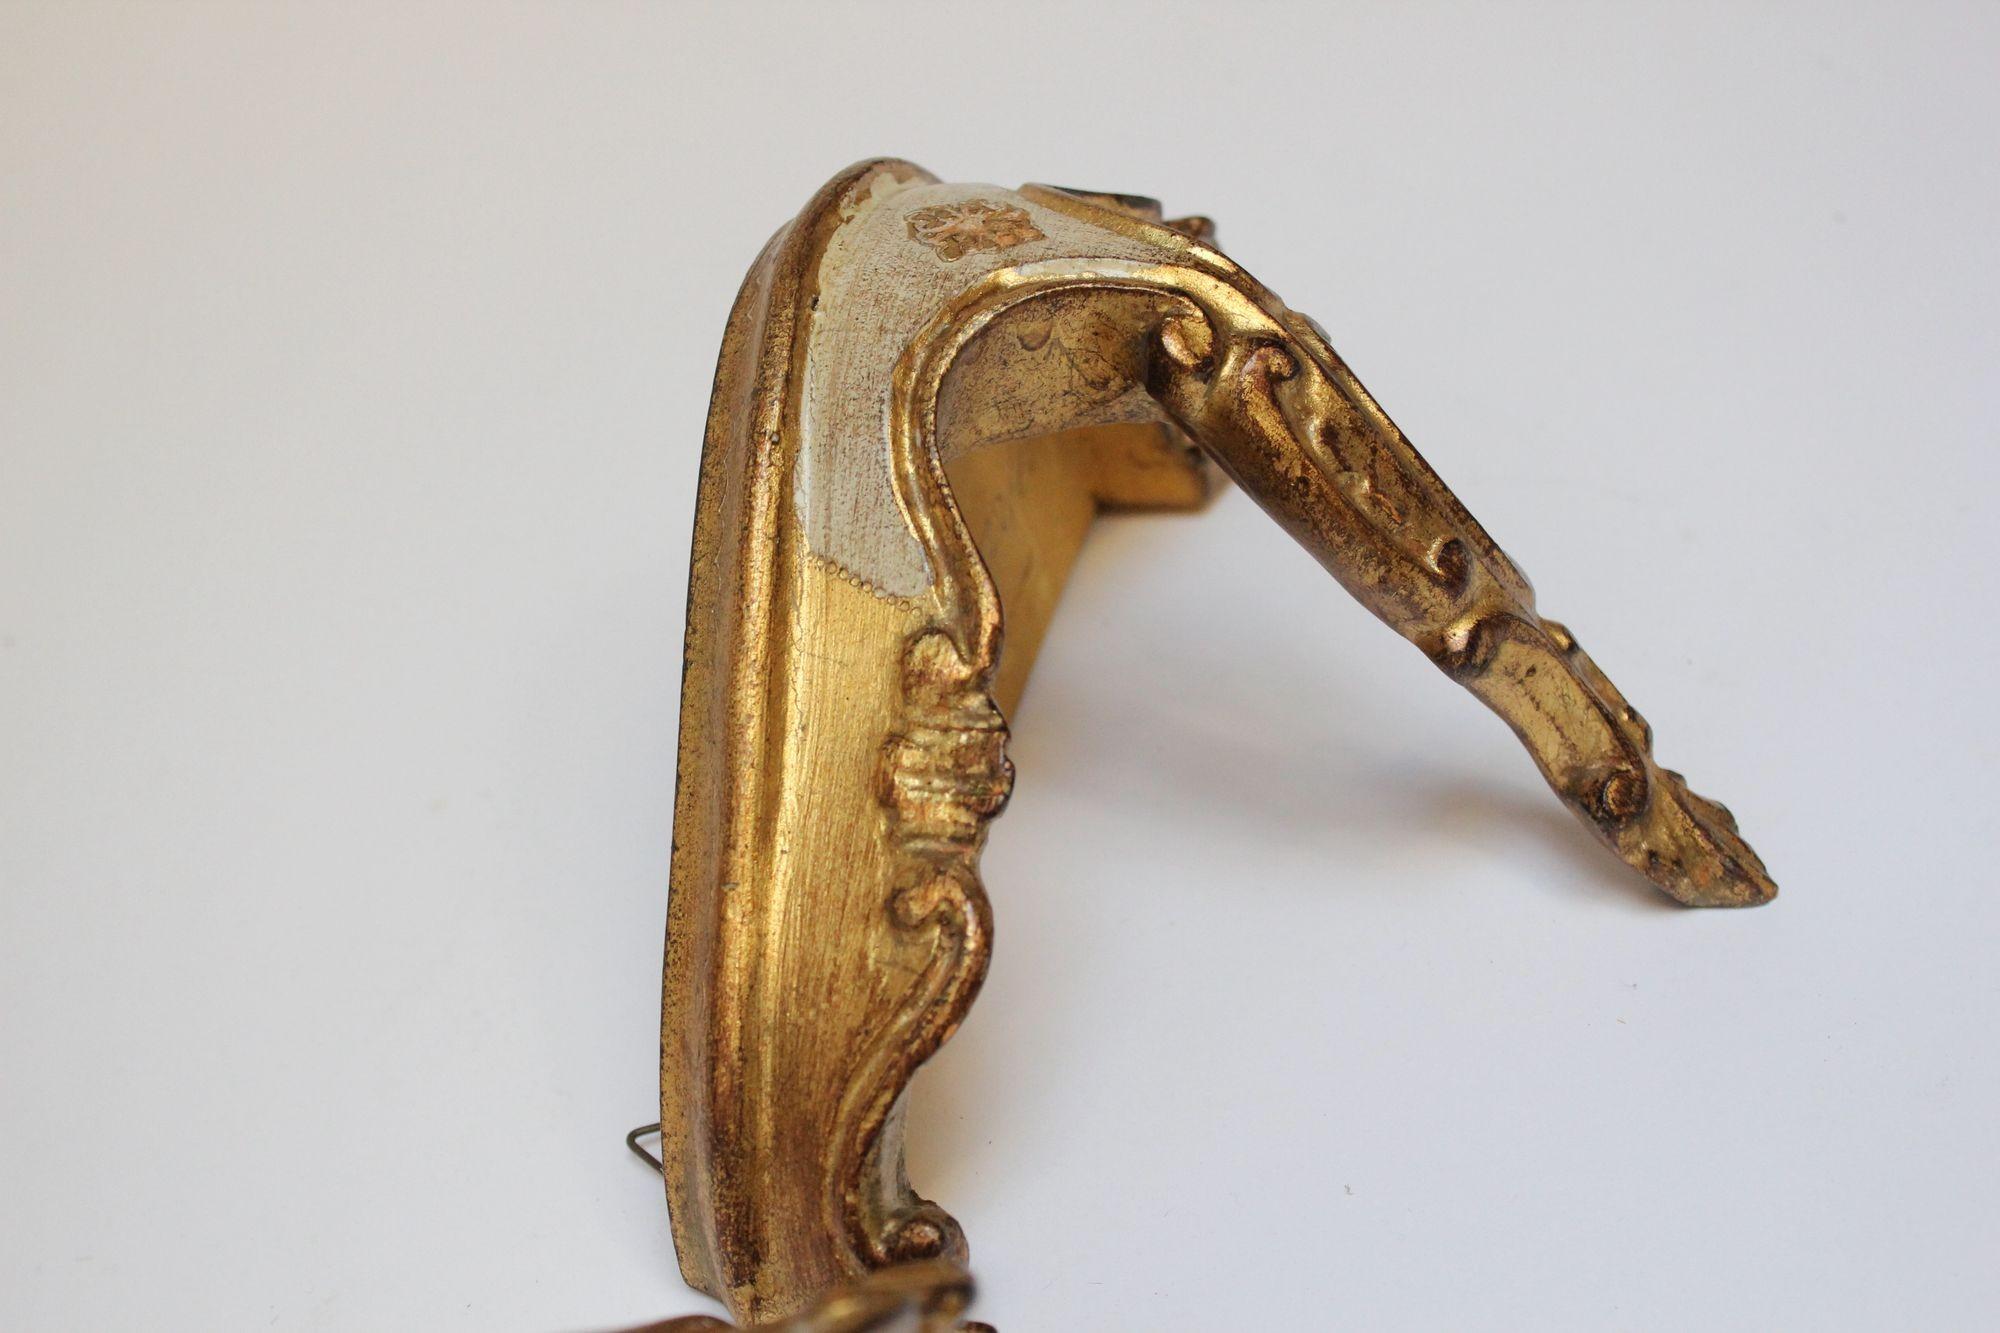 Pair of Vintage Florentine Giltwood Wall Brackets/Shelves with Rocaille Flourish For Sale 5